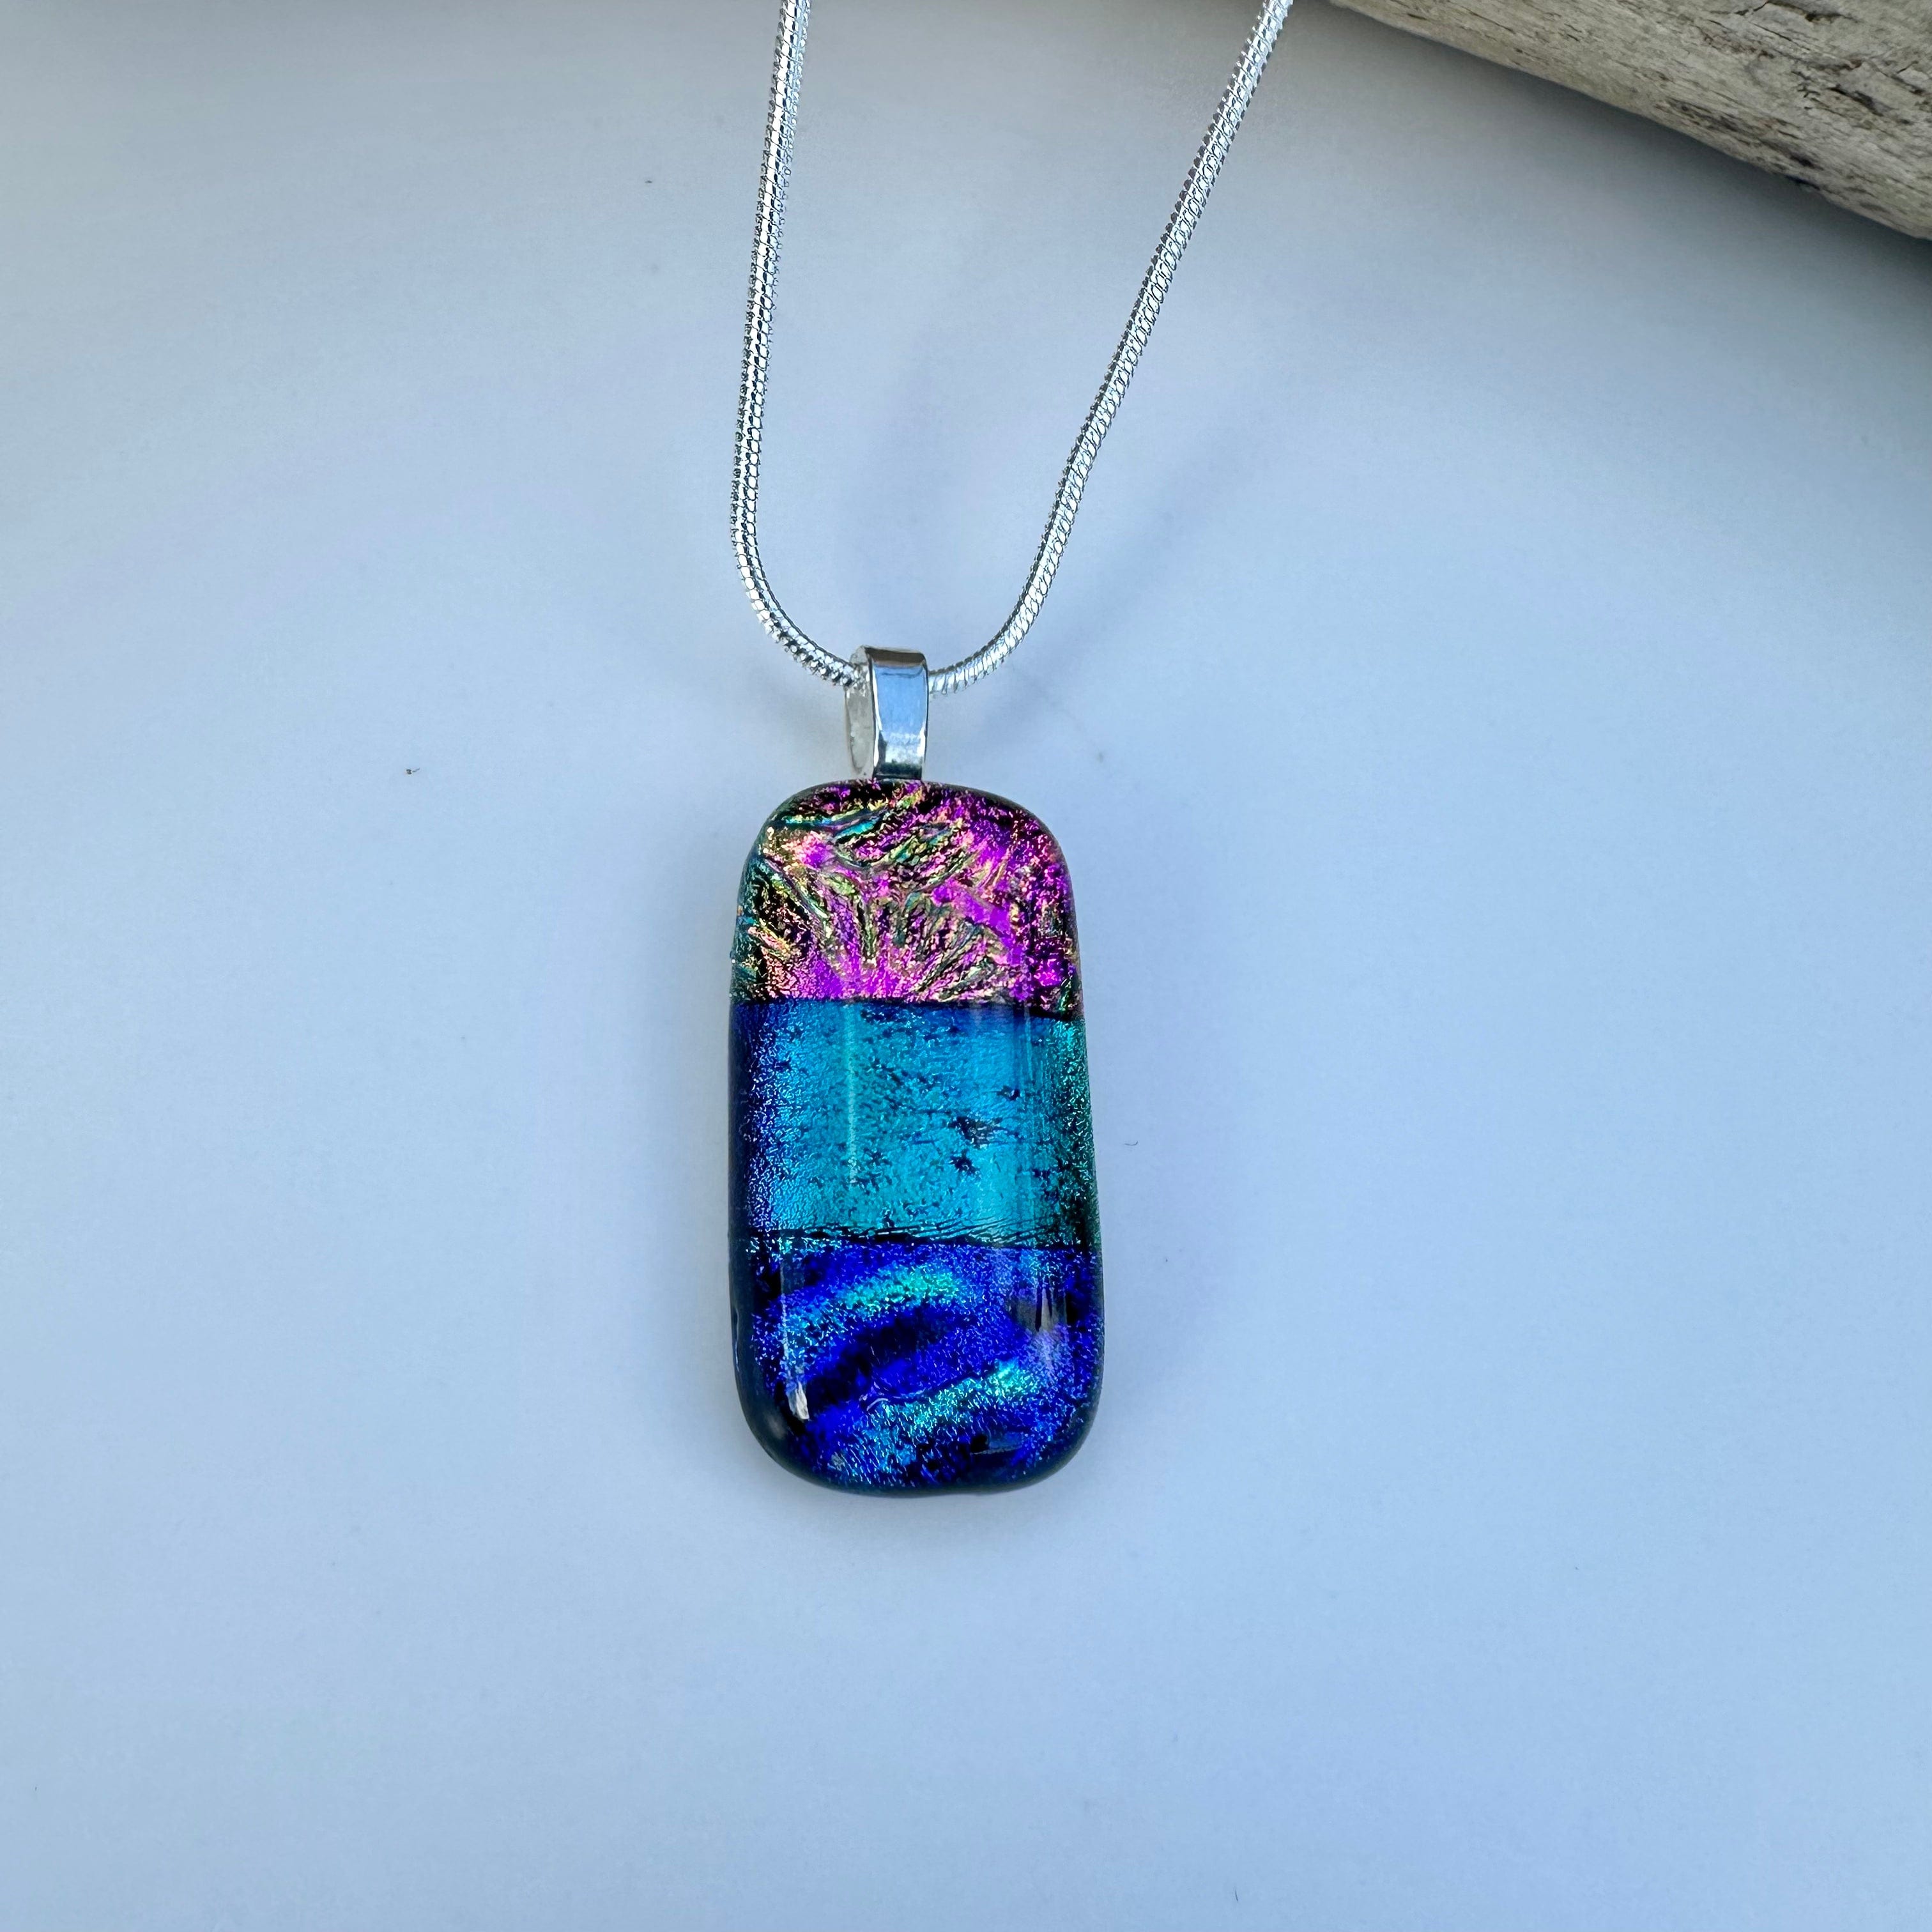 lusciousscarves Jewelry Dichroic Glass Pendant Necklace Handmade Pink Turquoise Seascape